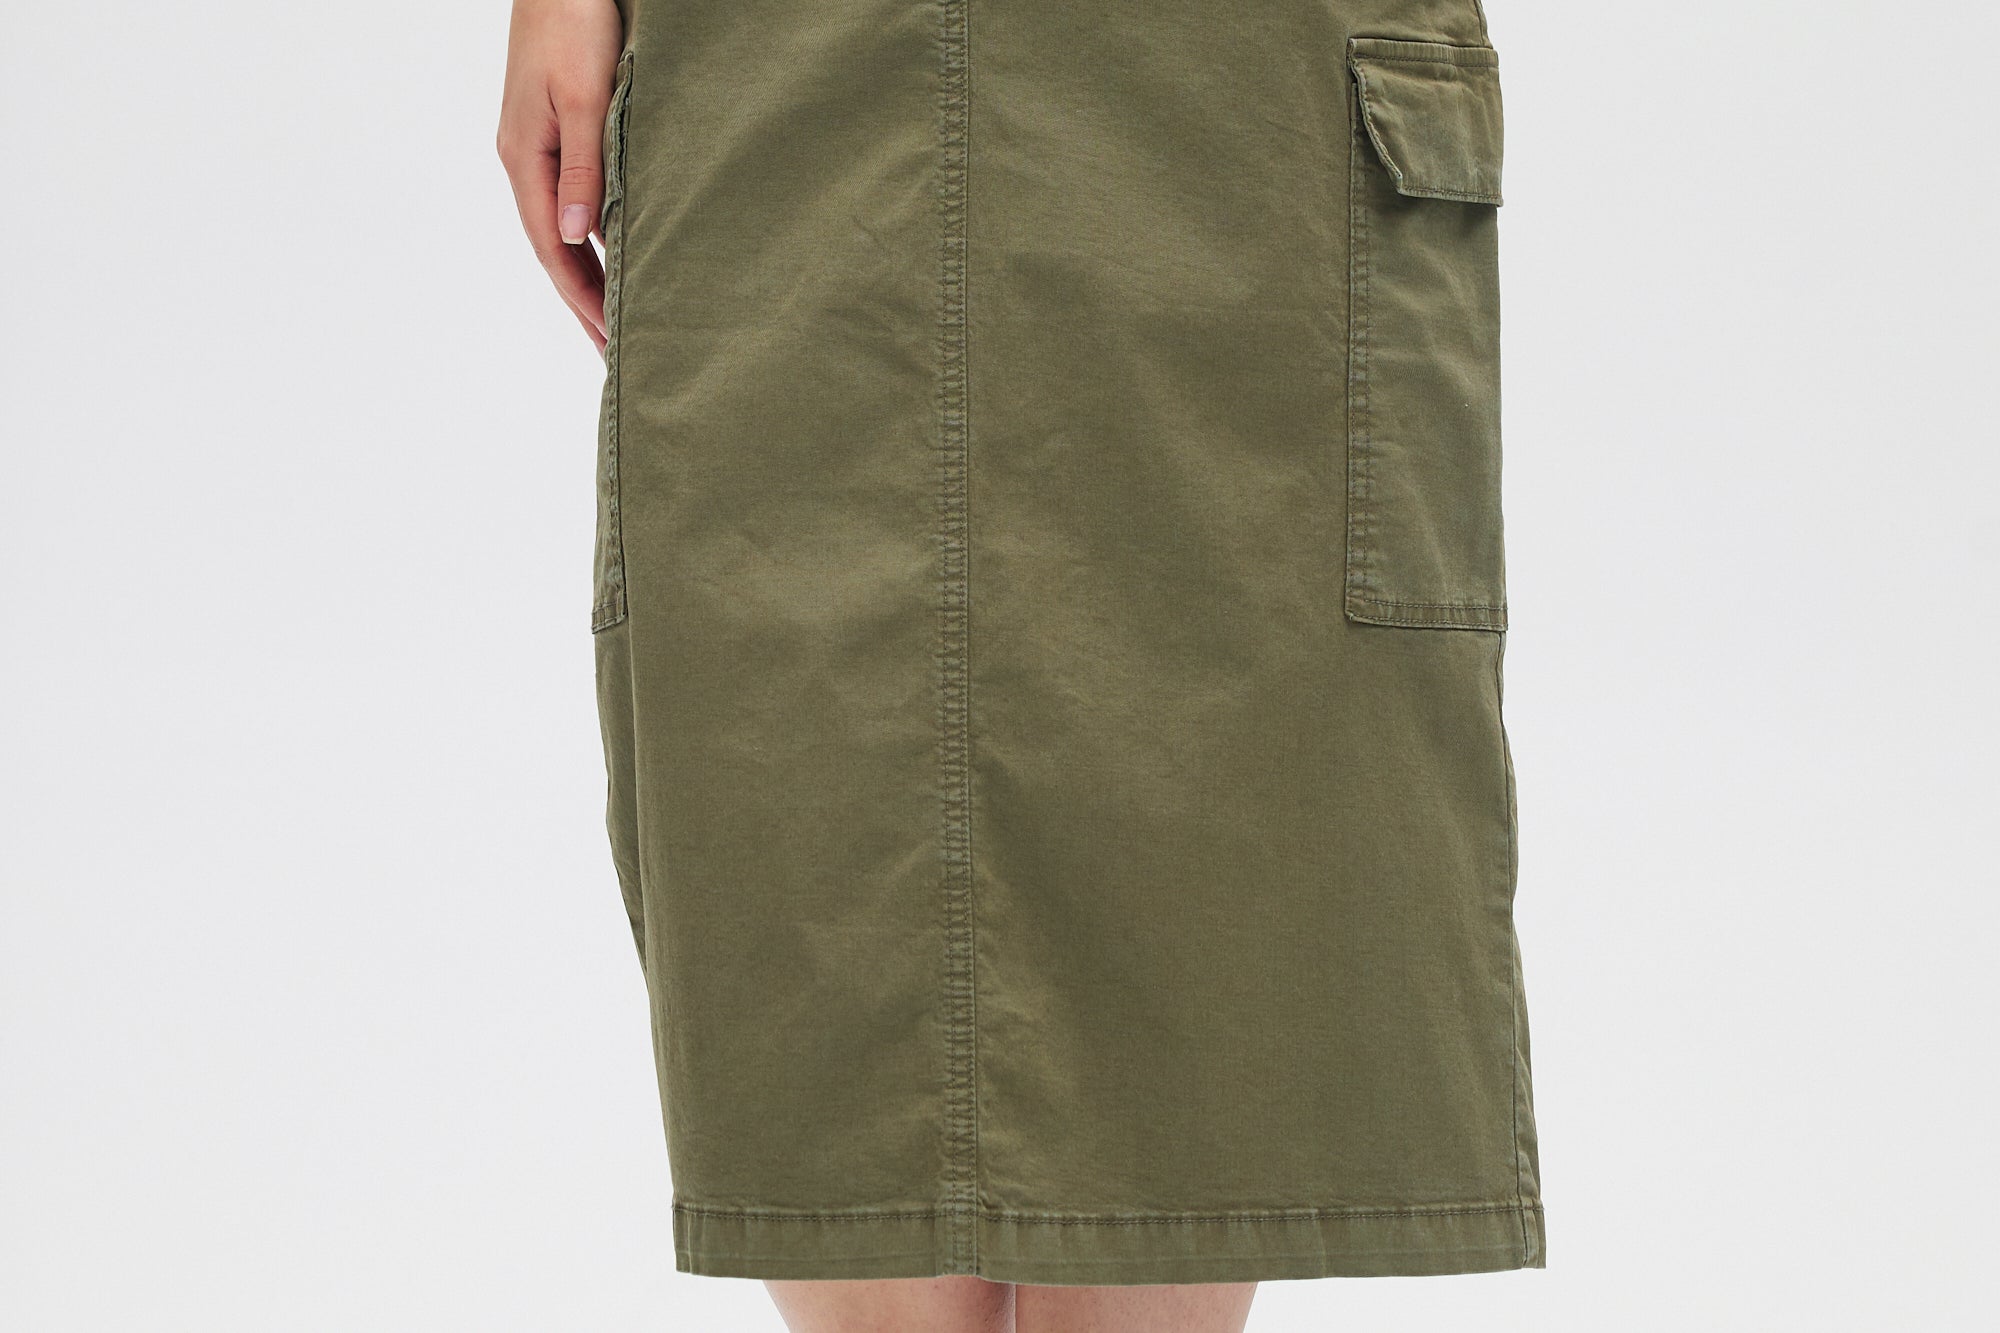 Olive Stretch Twill Skirt close up